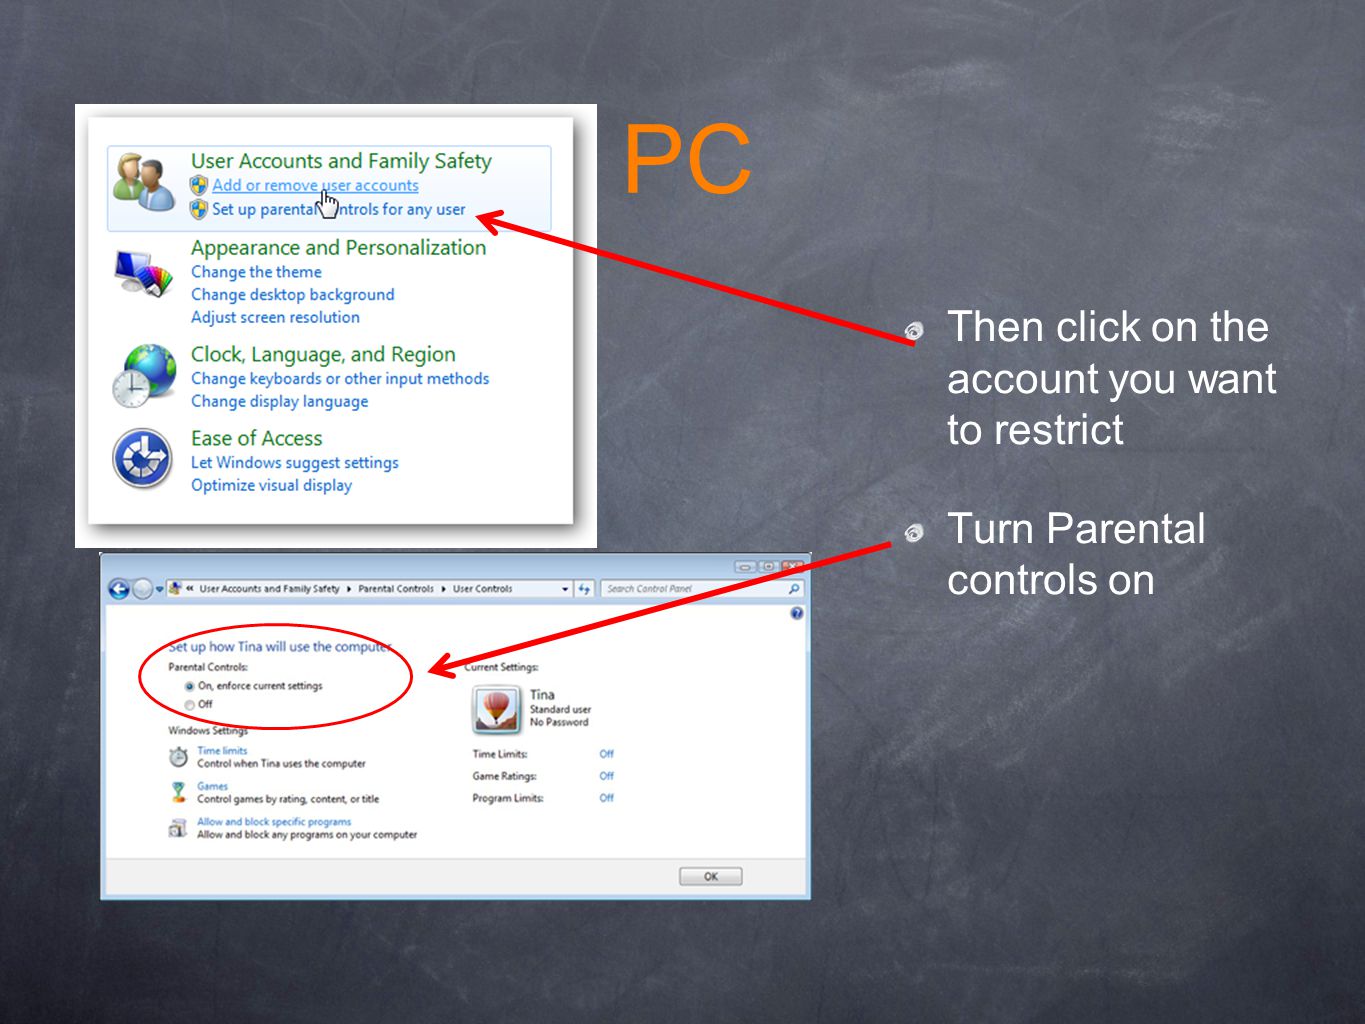 PC Then click on the account you want to restrict Turn Parental controls on